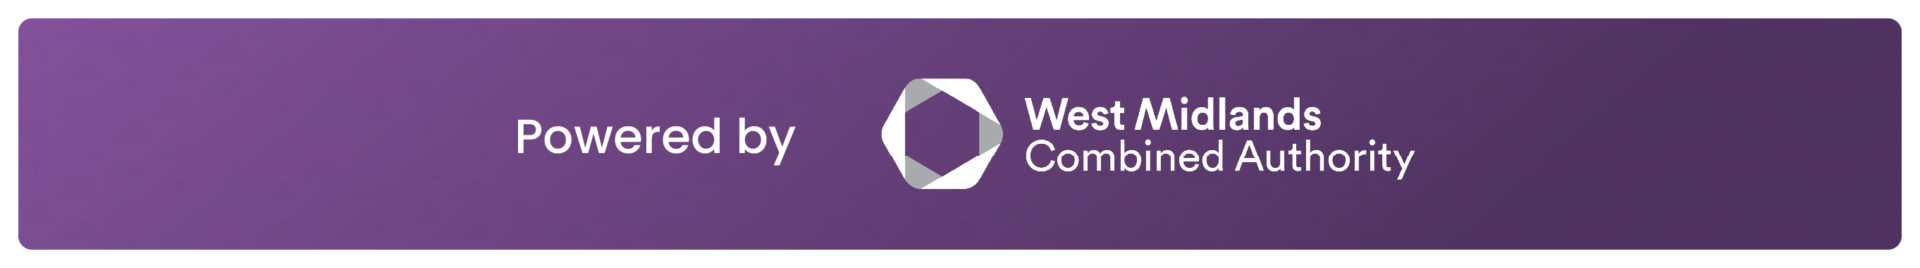 Powered By West Midlands Combined Authority